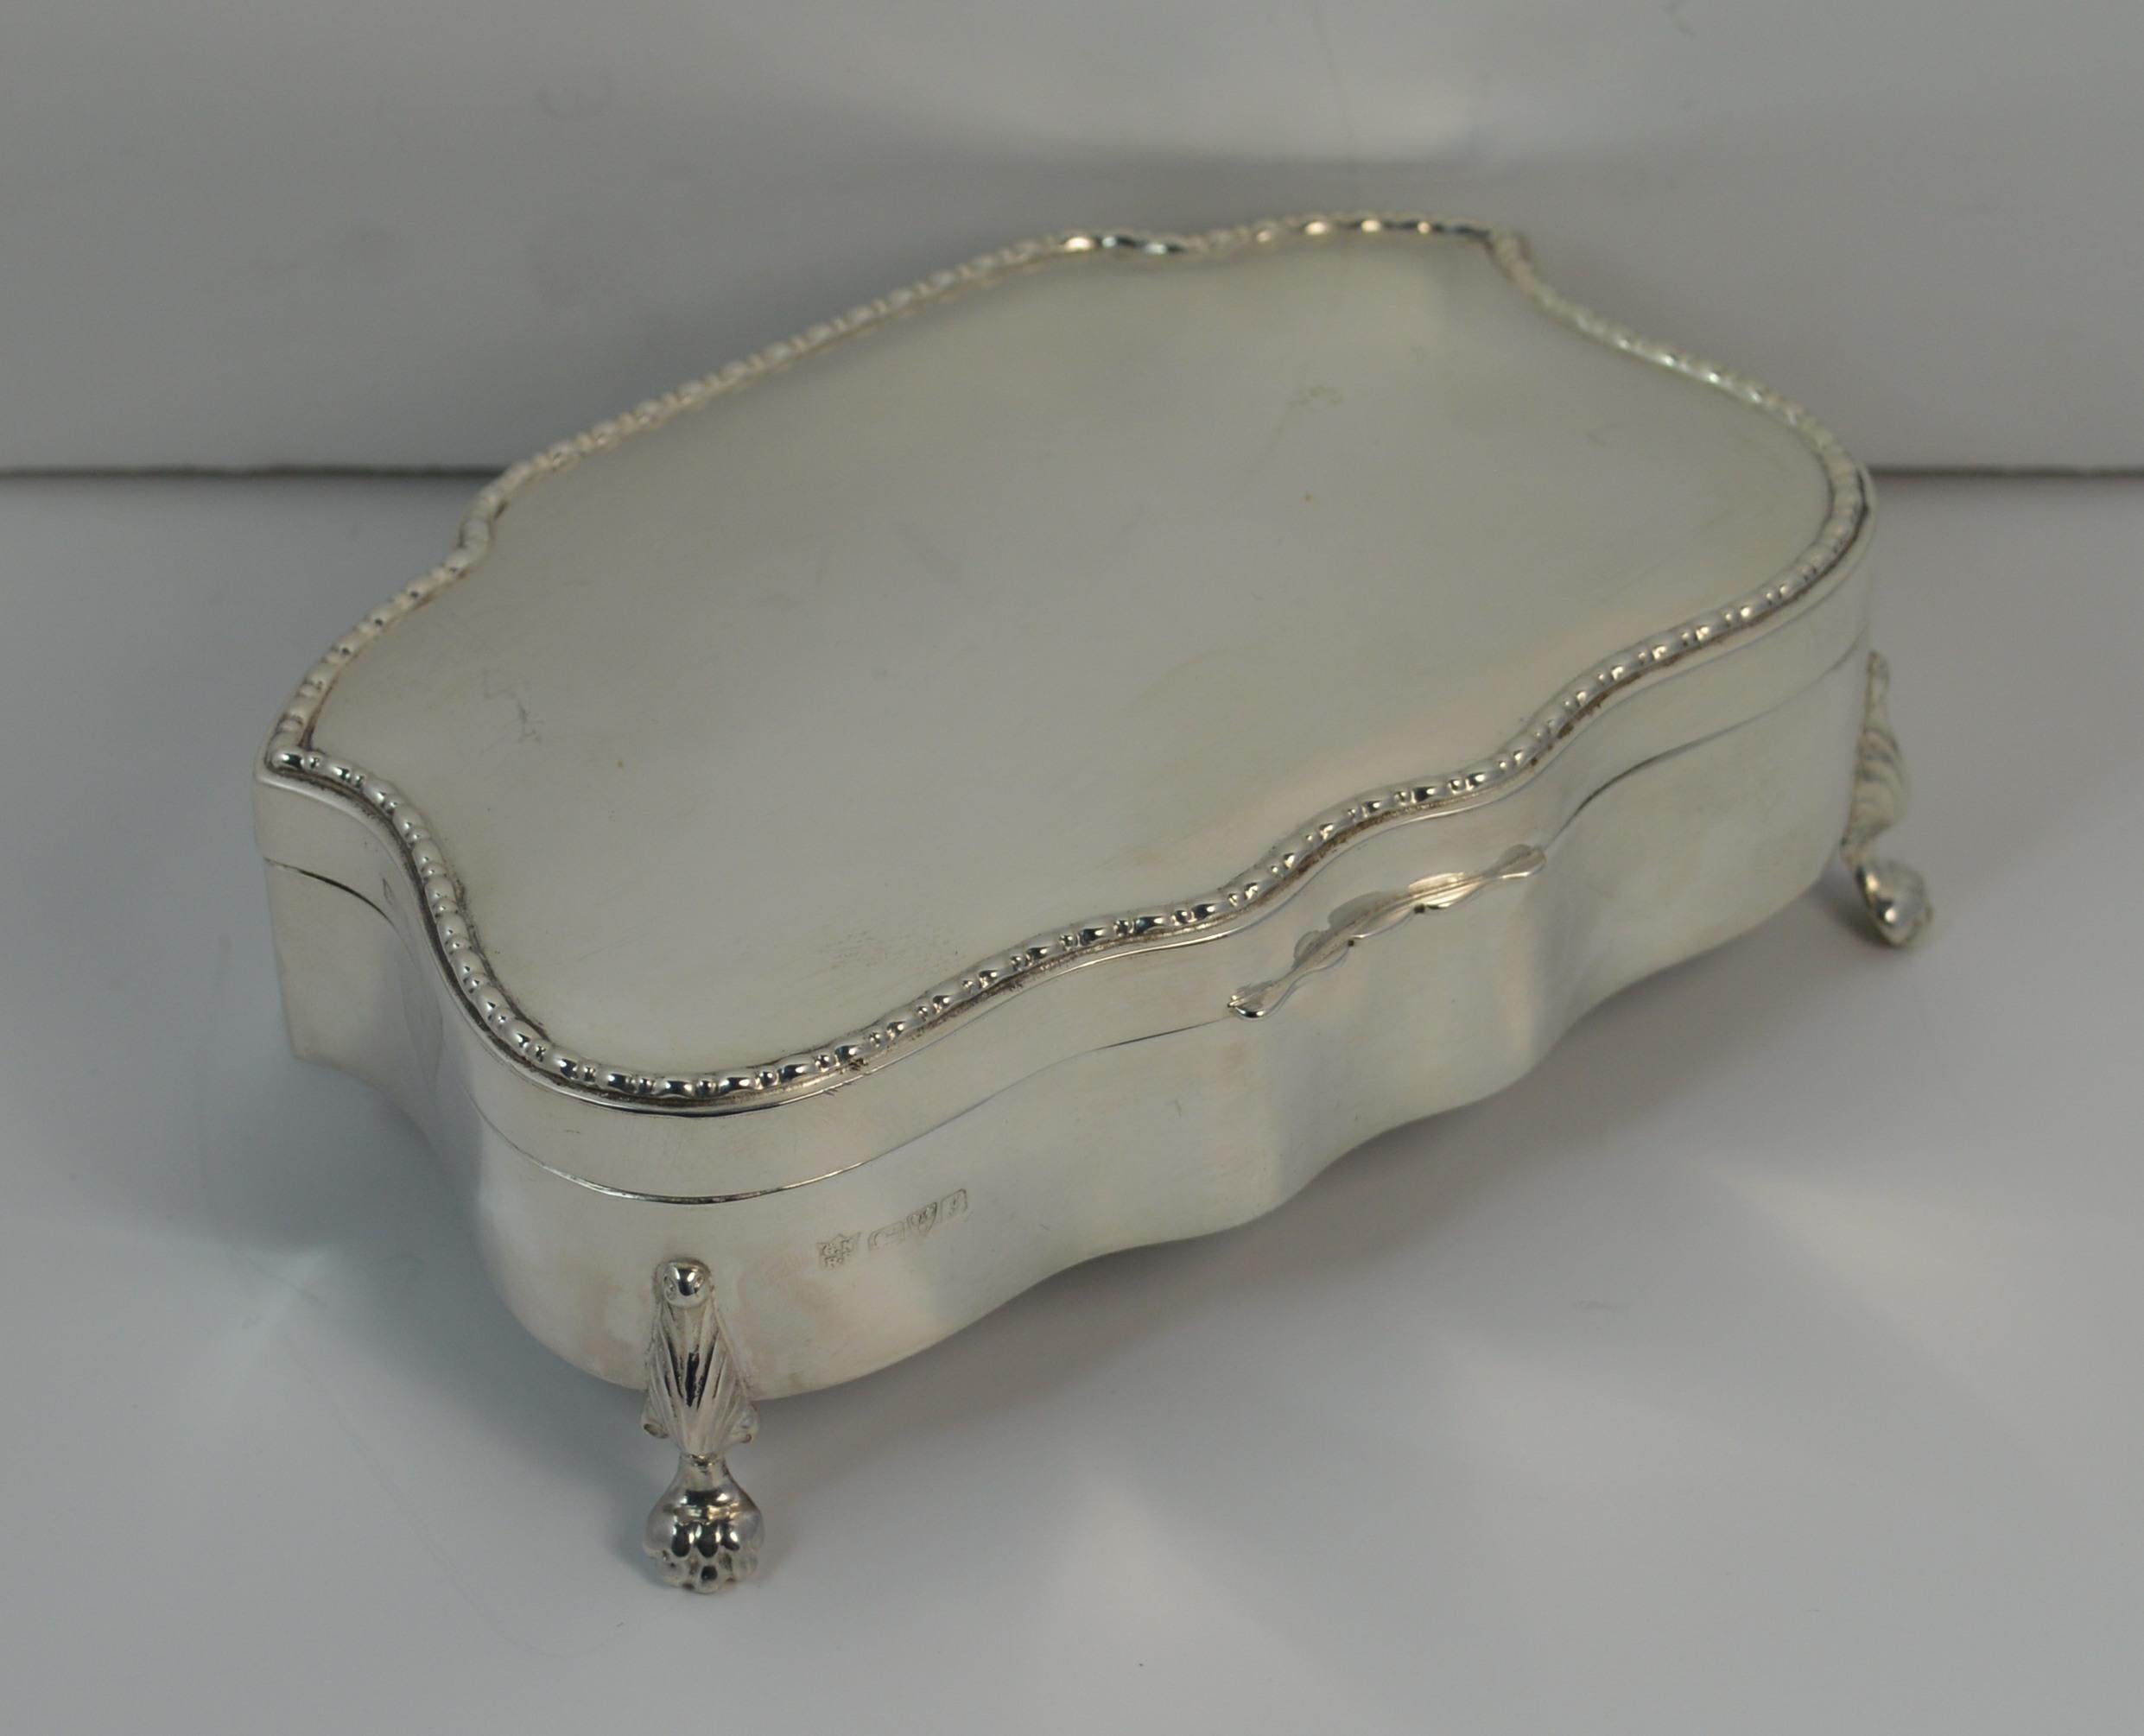 A beautiful English made solid silver jewellery box.
Stylish shape with plain sides and lid and of waved shape. Standing on four feet.
Original insides with six slots for rings and a plain front section for earrings, chains, pendants etc

Hallmarks